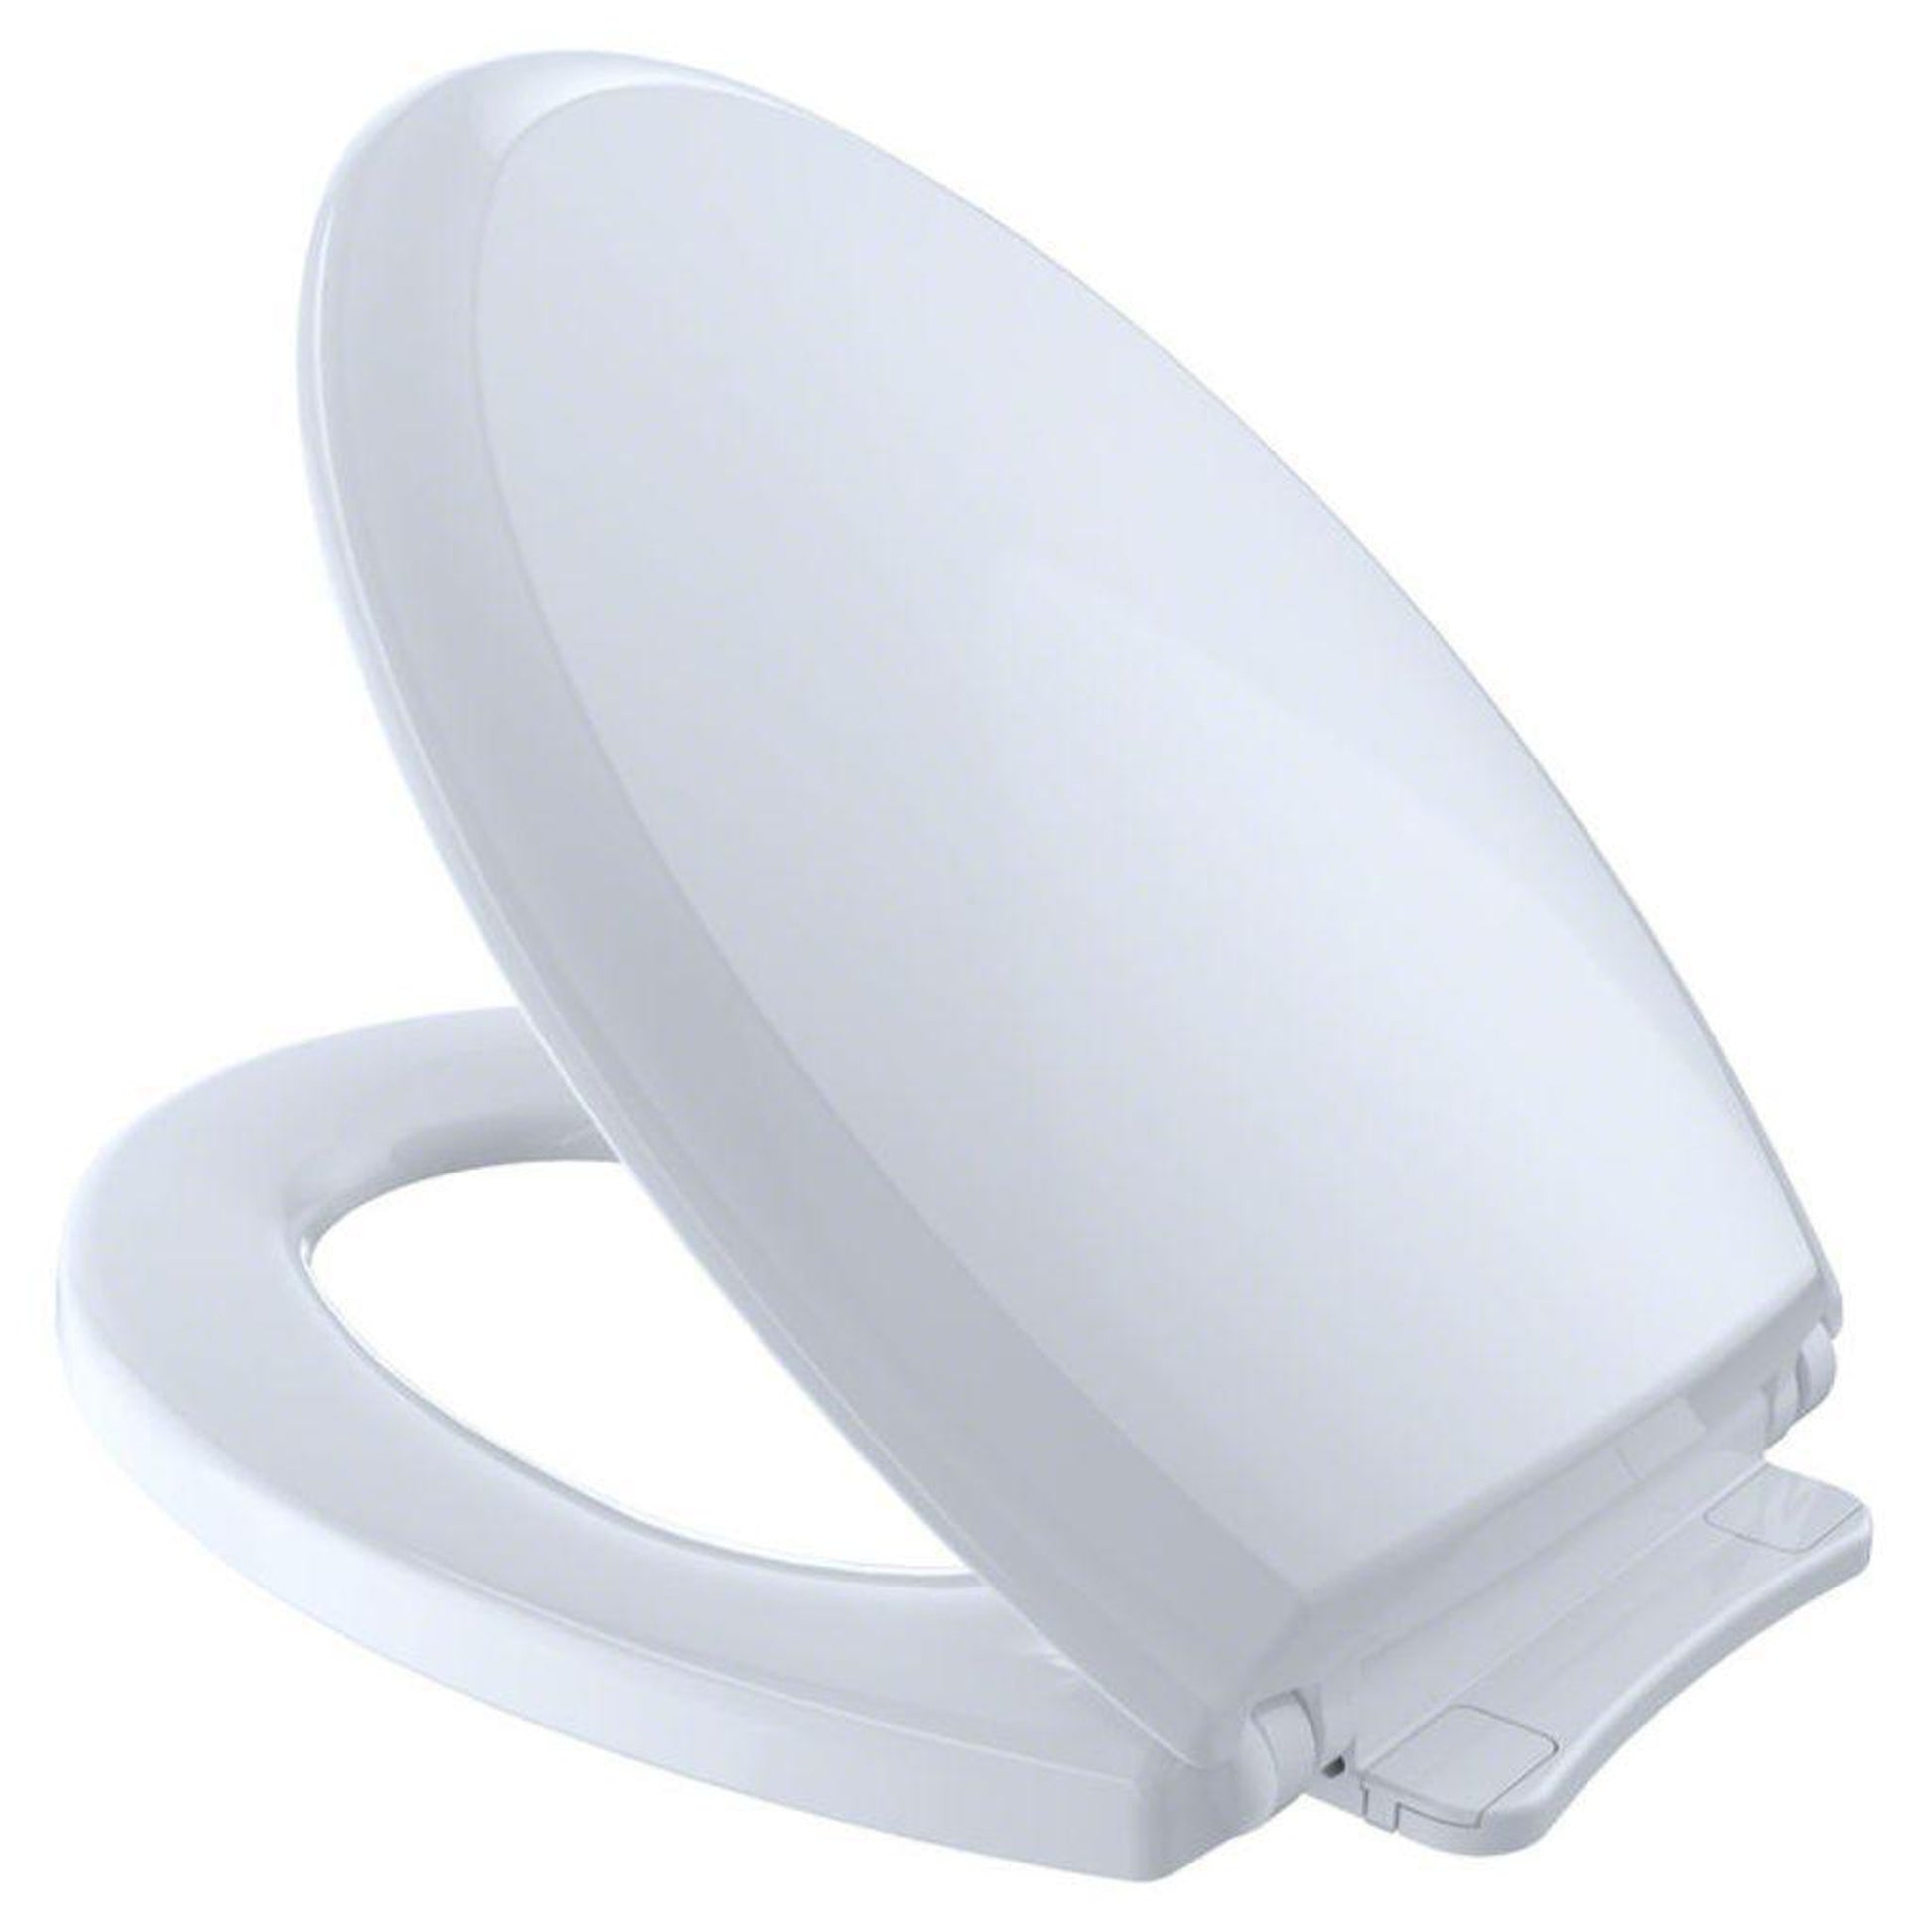 Toto Guinevere Cotton White Softclose Elongated Toilet Seat